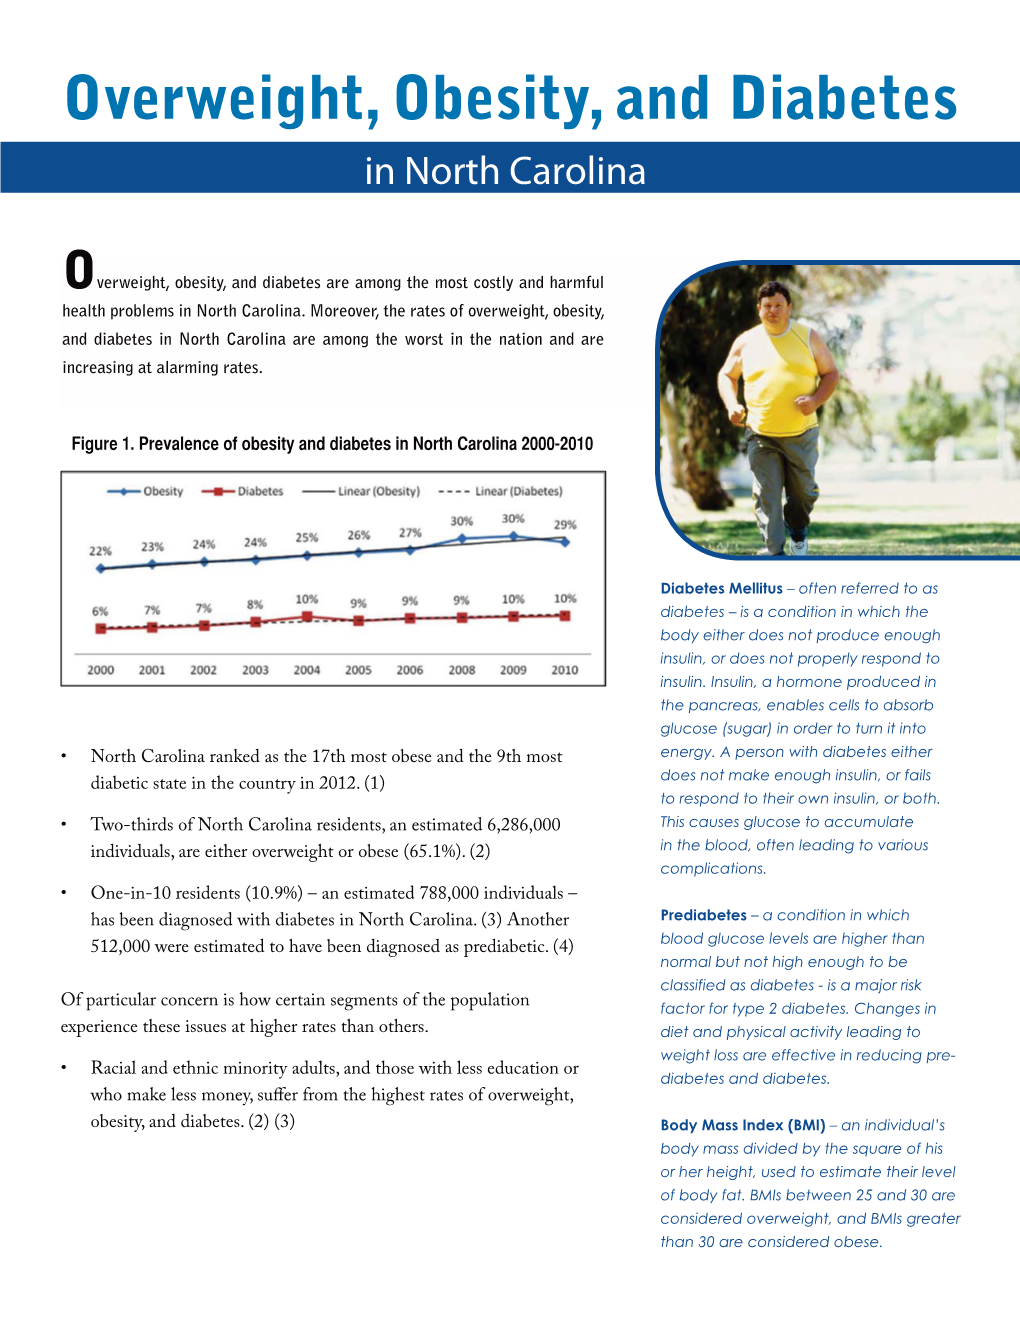 Overweight, Obesity, and Diabetes in North Carolina